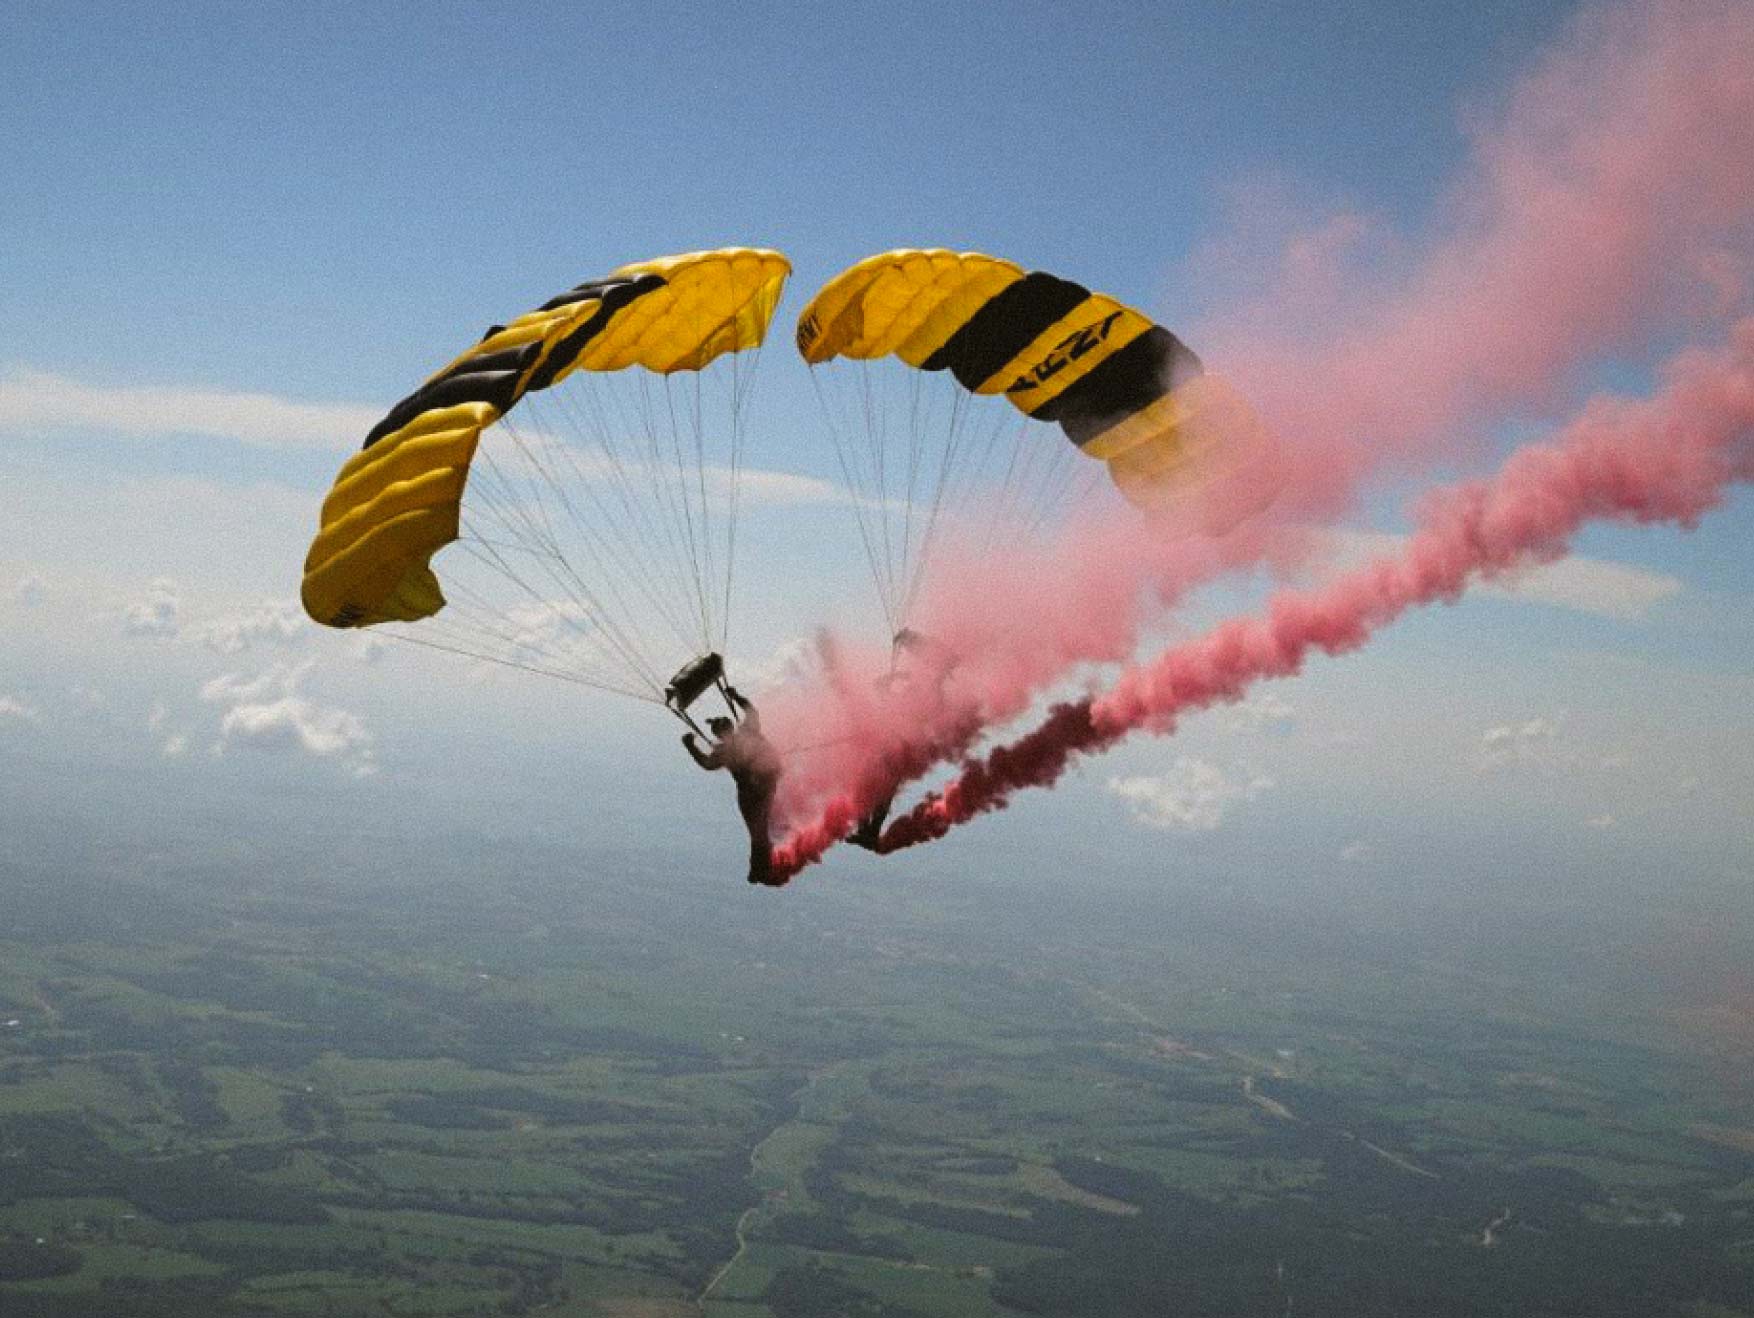 Two Golden Knights skydivers performing a jump leaving a trail of red smoke behind them